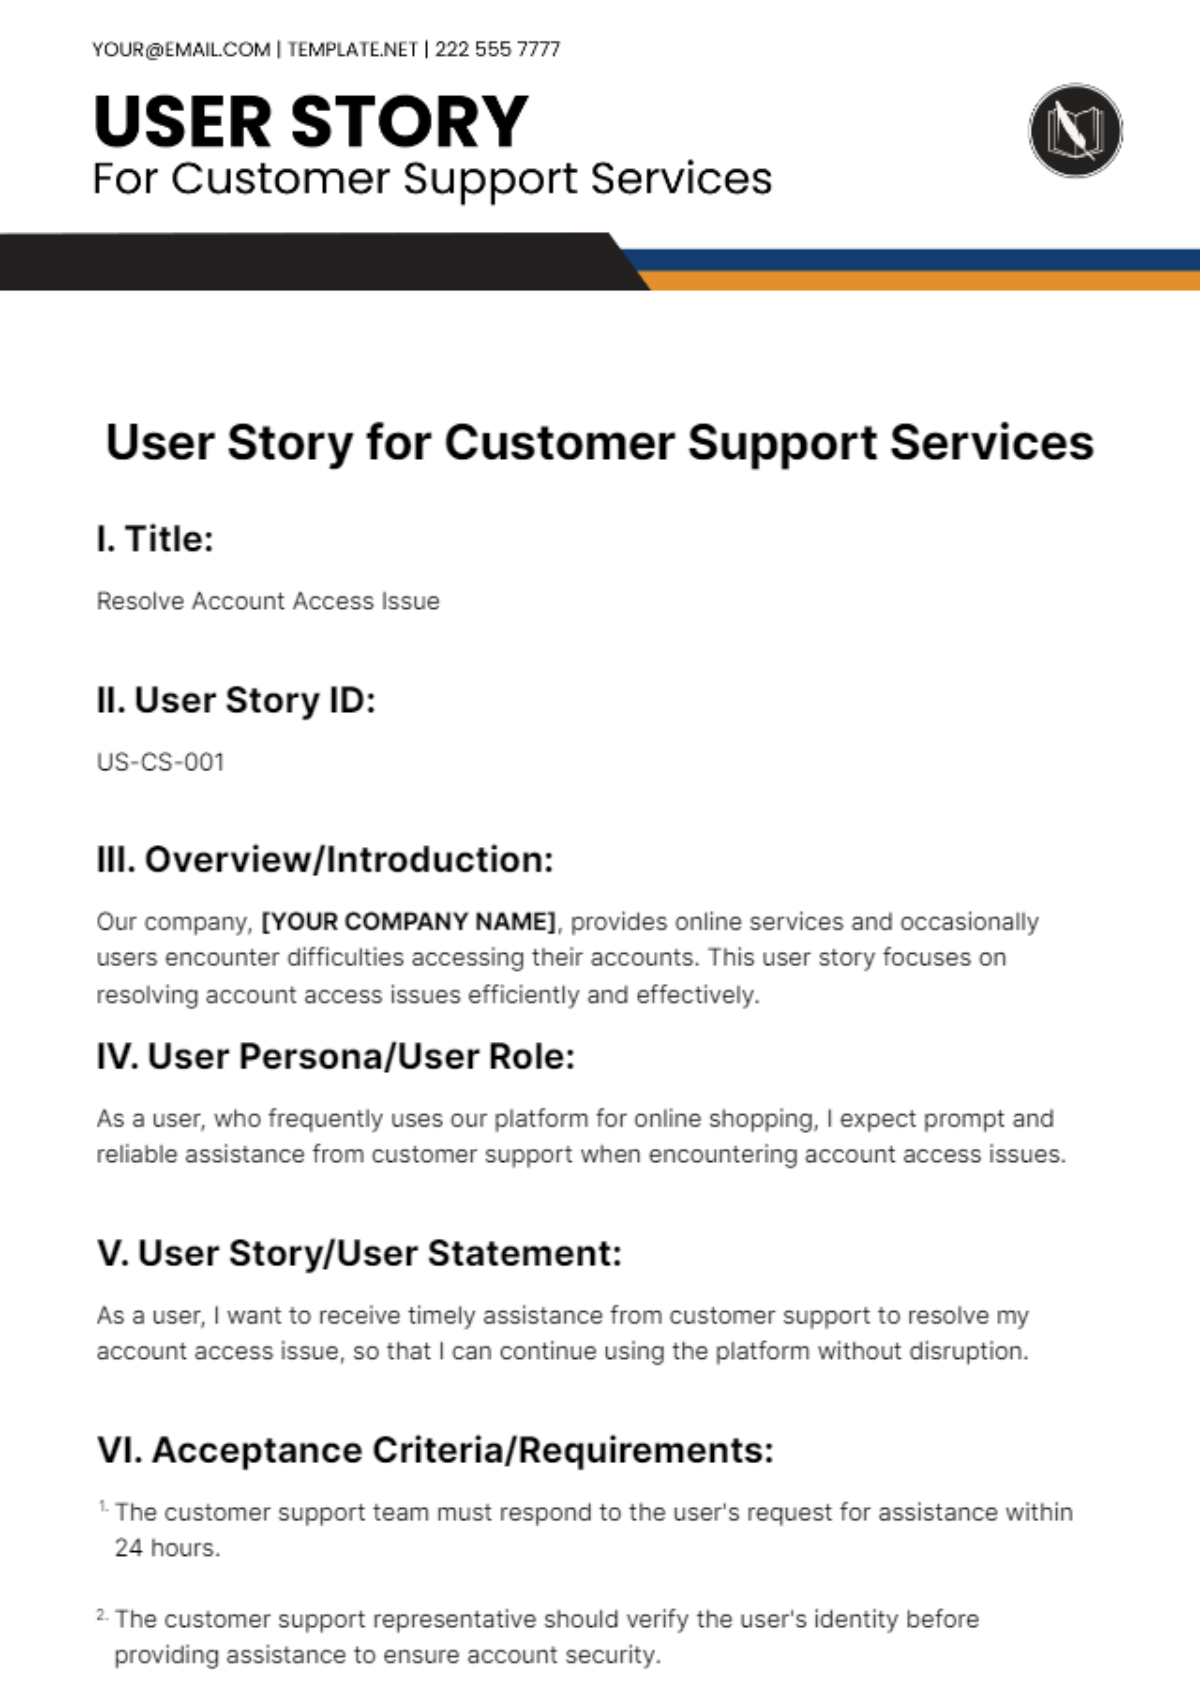 Free User Story For Customer Support Services Template